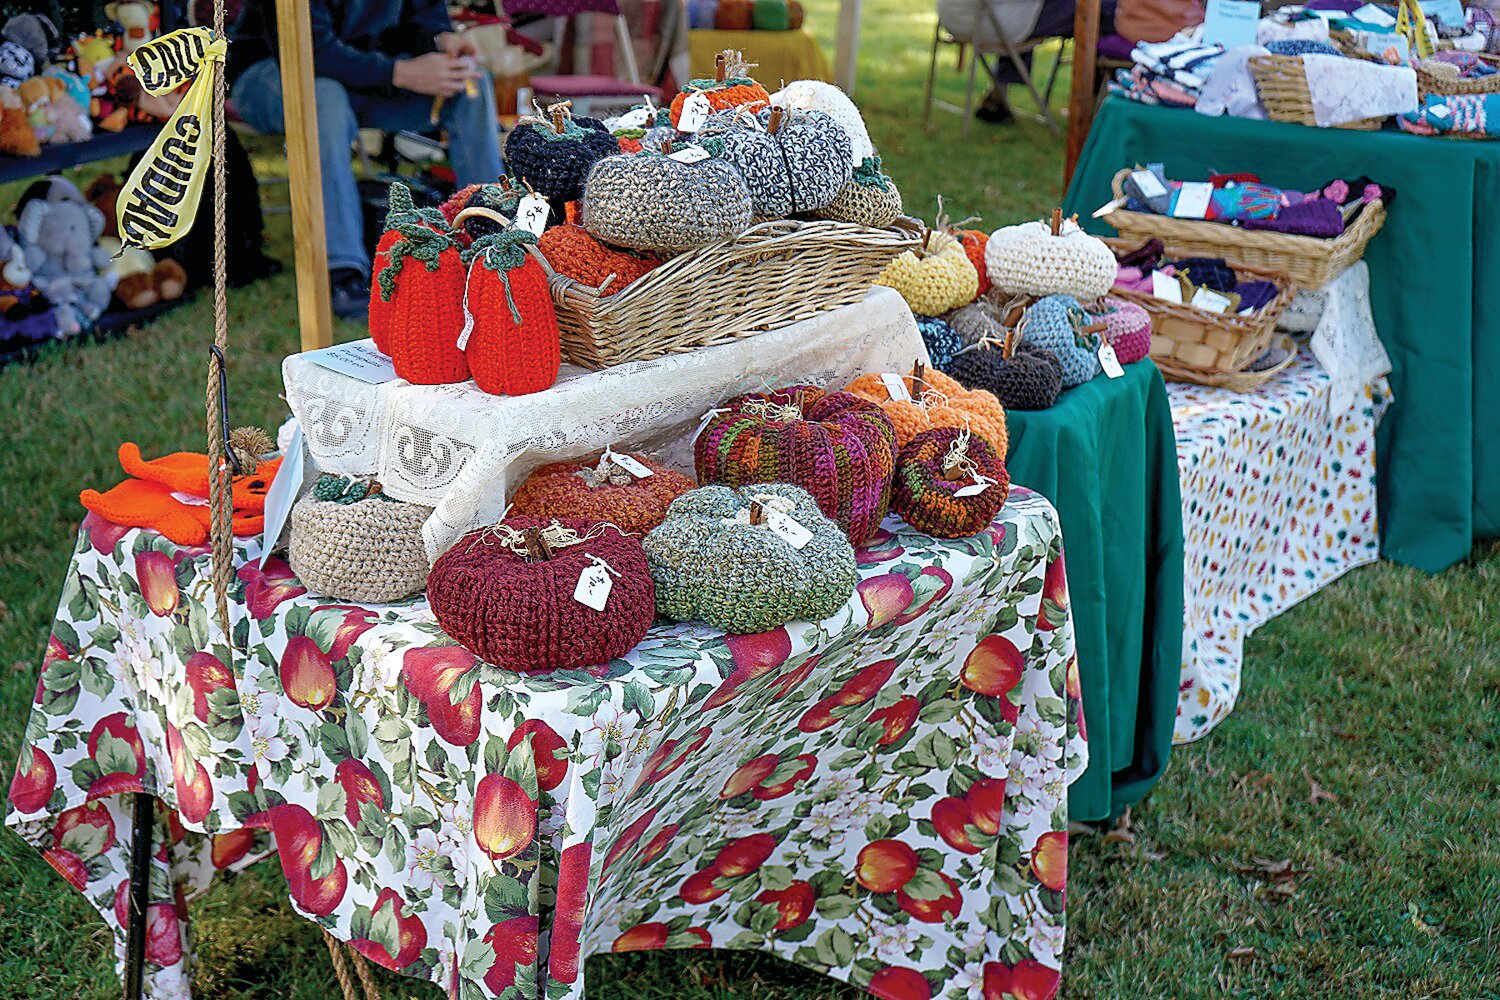 Local artisans sold a variety of handmade items at the fall festival in Hilltown.